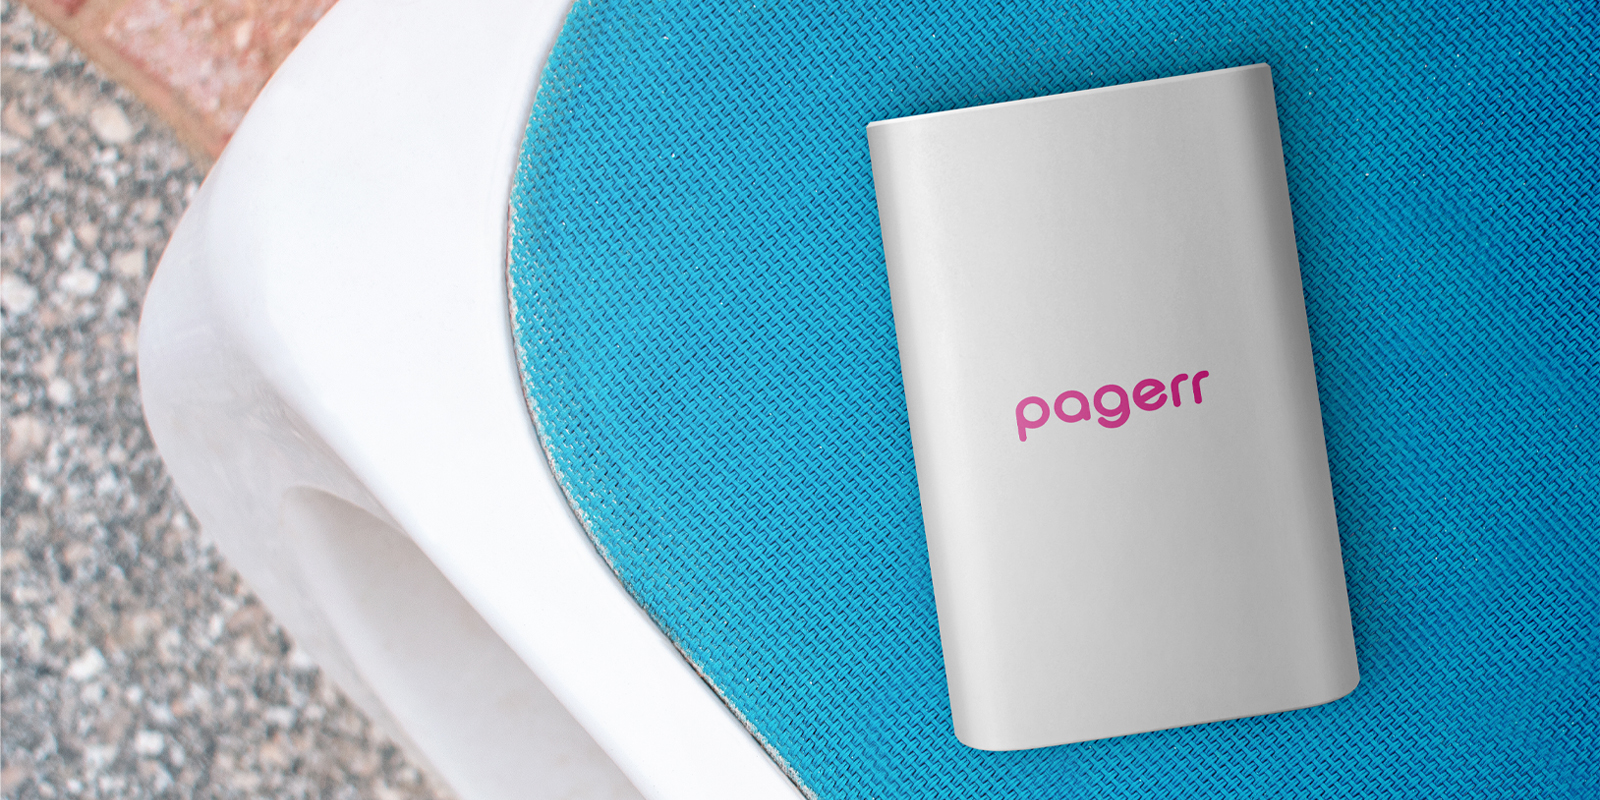 Chargers & power banks in Paris - Print with Pagerr